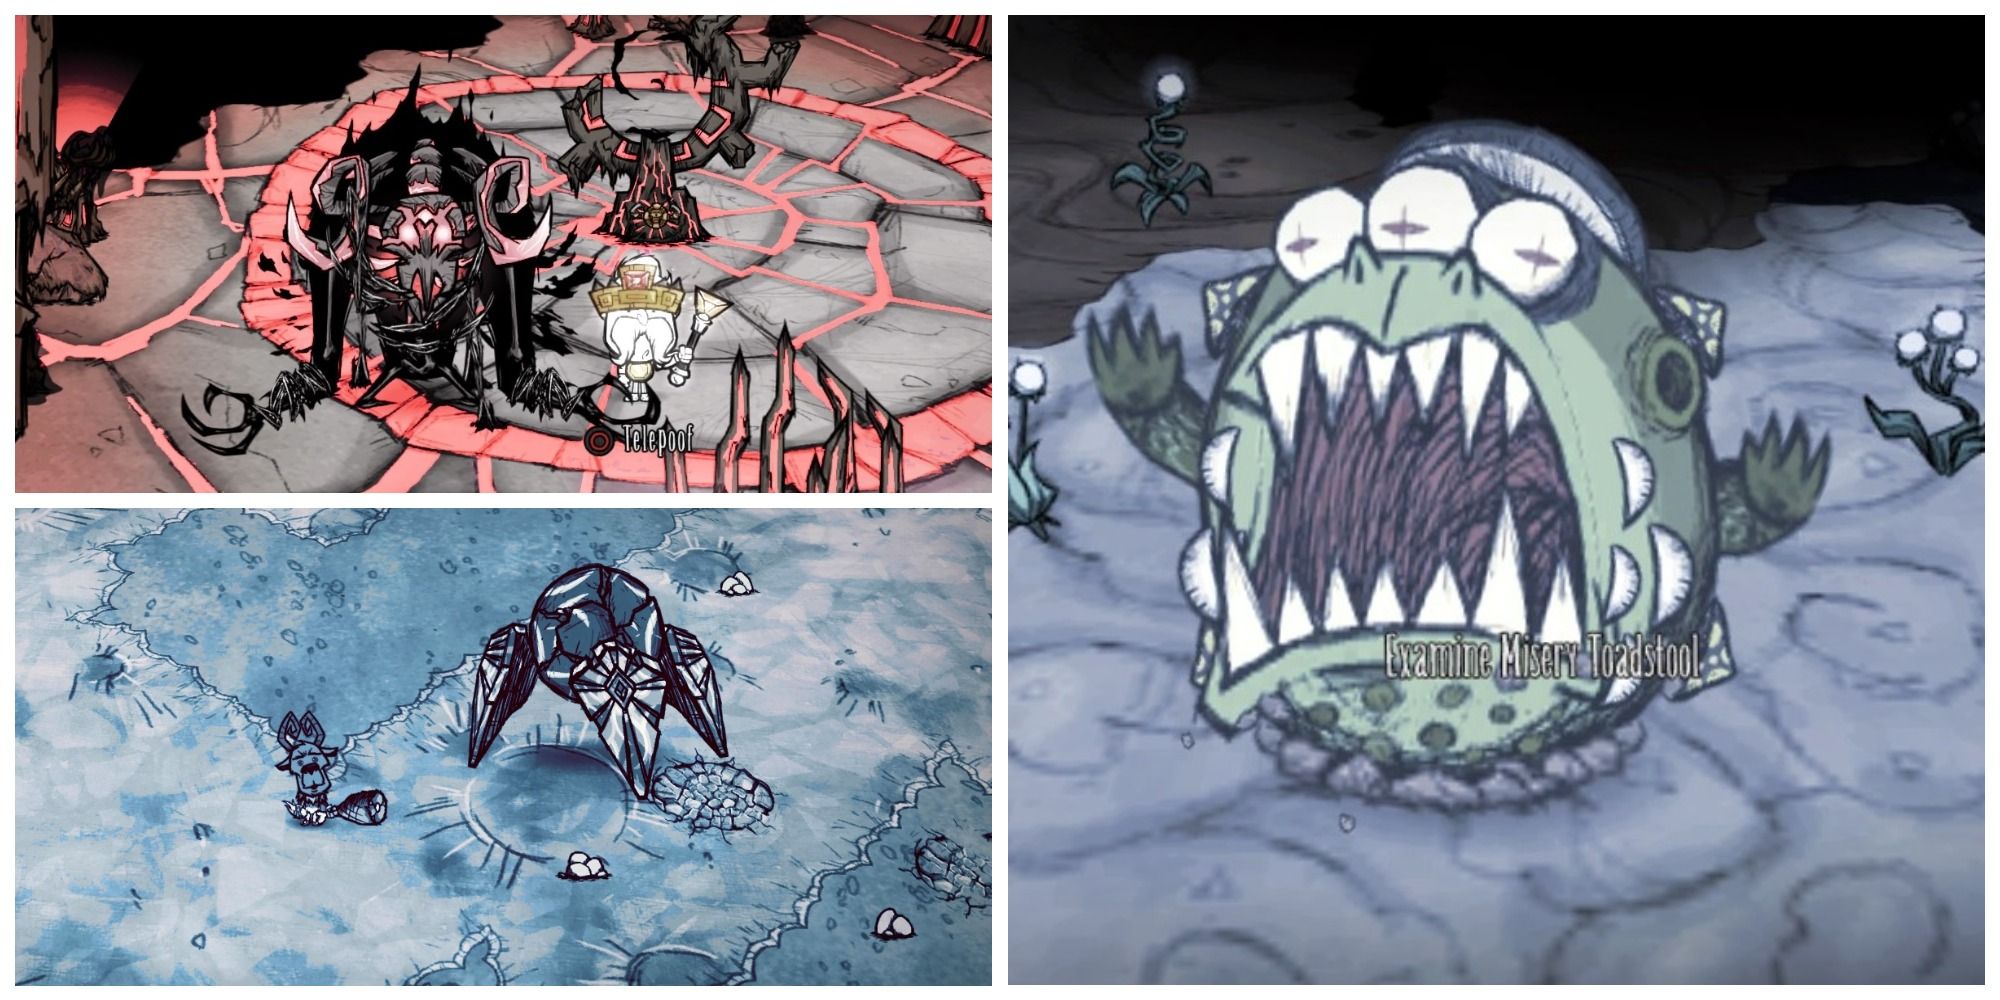 Don't Starve Together Bosses Featured Image Fuelweaver Toadstool and Celestial Champion